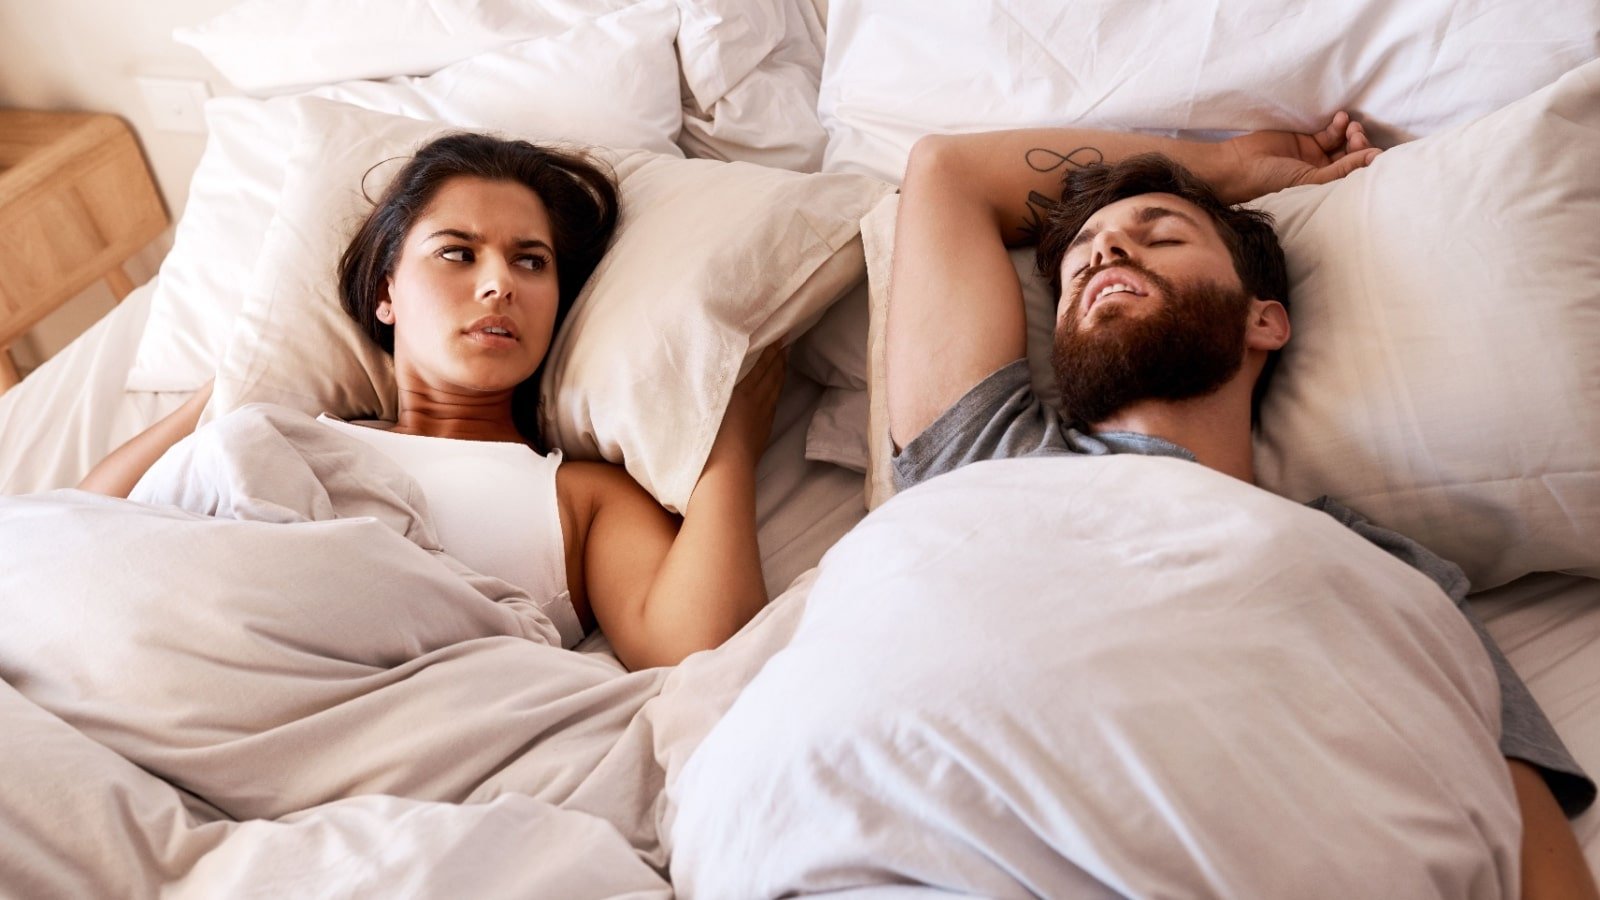 <p>By addressing both the physical and lifestyle factors contributing to snoring, you can significantly improve your sleep quality and overall health. </p> <p>The post <a href="https://www.fodmapeveryday.com/snores-roars-and-bedtime-wars-surviving-the-symphony-of-sleep-snoring-how-to-make-it-stop/">Snores, Roars, and Bedtime Wars: Surviving the Symphony of Sleep – Snoring & How To Make It Stop</a> appeared first on <a href="https://www.fodmapeveryday.com">FODMAP Everyday</a>.</p>